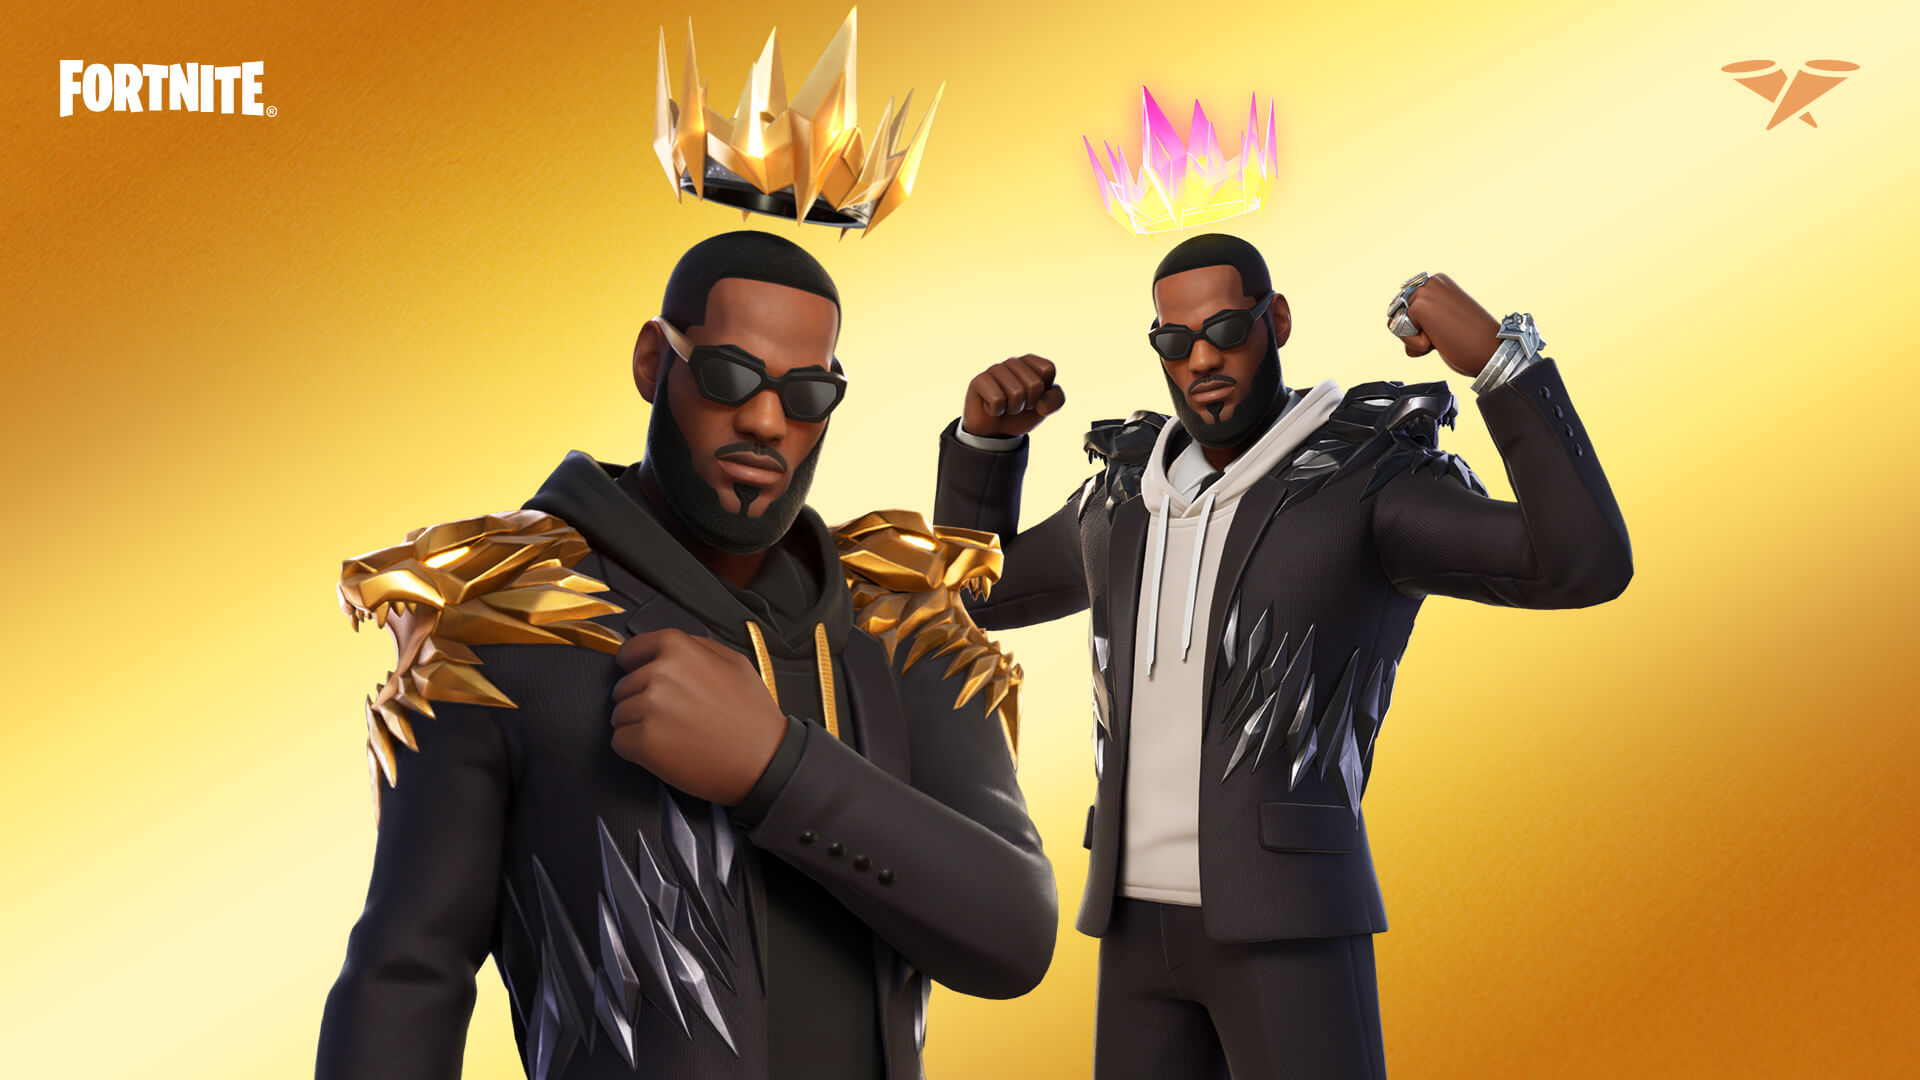 Fortnite': When Is LeBron James Coming to 'Fortnite' and How to Unlock Him